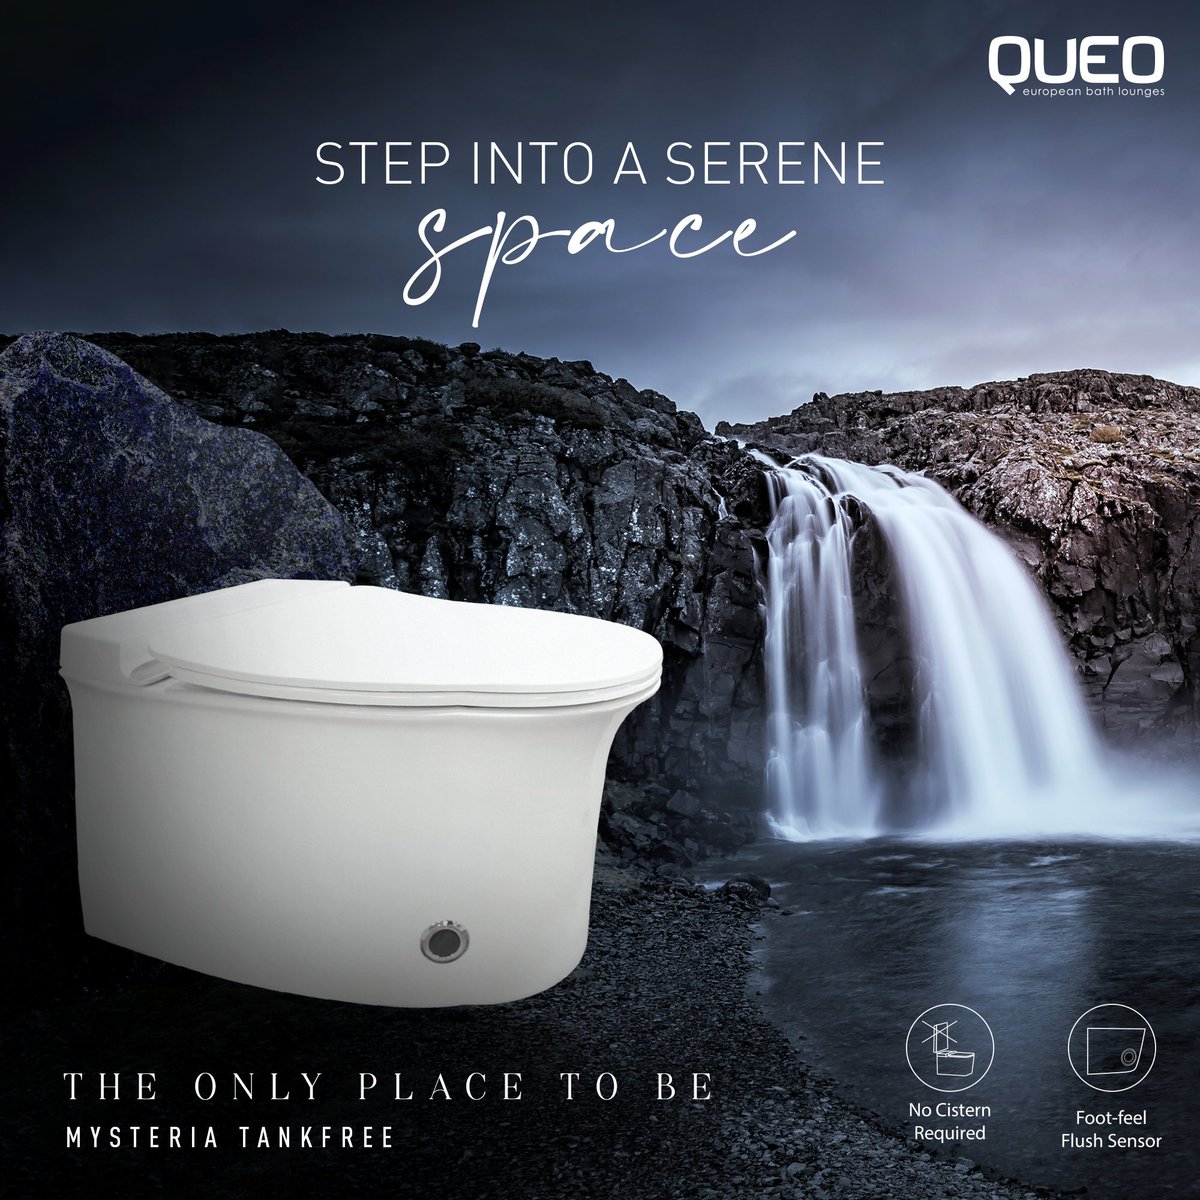 Queo’s Mysteria Water Closet is crafted to enhance the aesthetics and functionality of any bath space. Inspired by European heritage, the exquisite design exudes elegance while immersing you in an atmosphere that is grand and charming.
#Queo #TheOnlyPlaceToBe #MysteriaWaterCloset